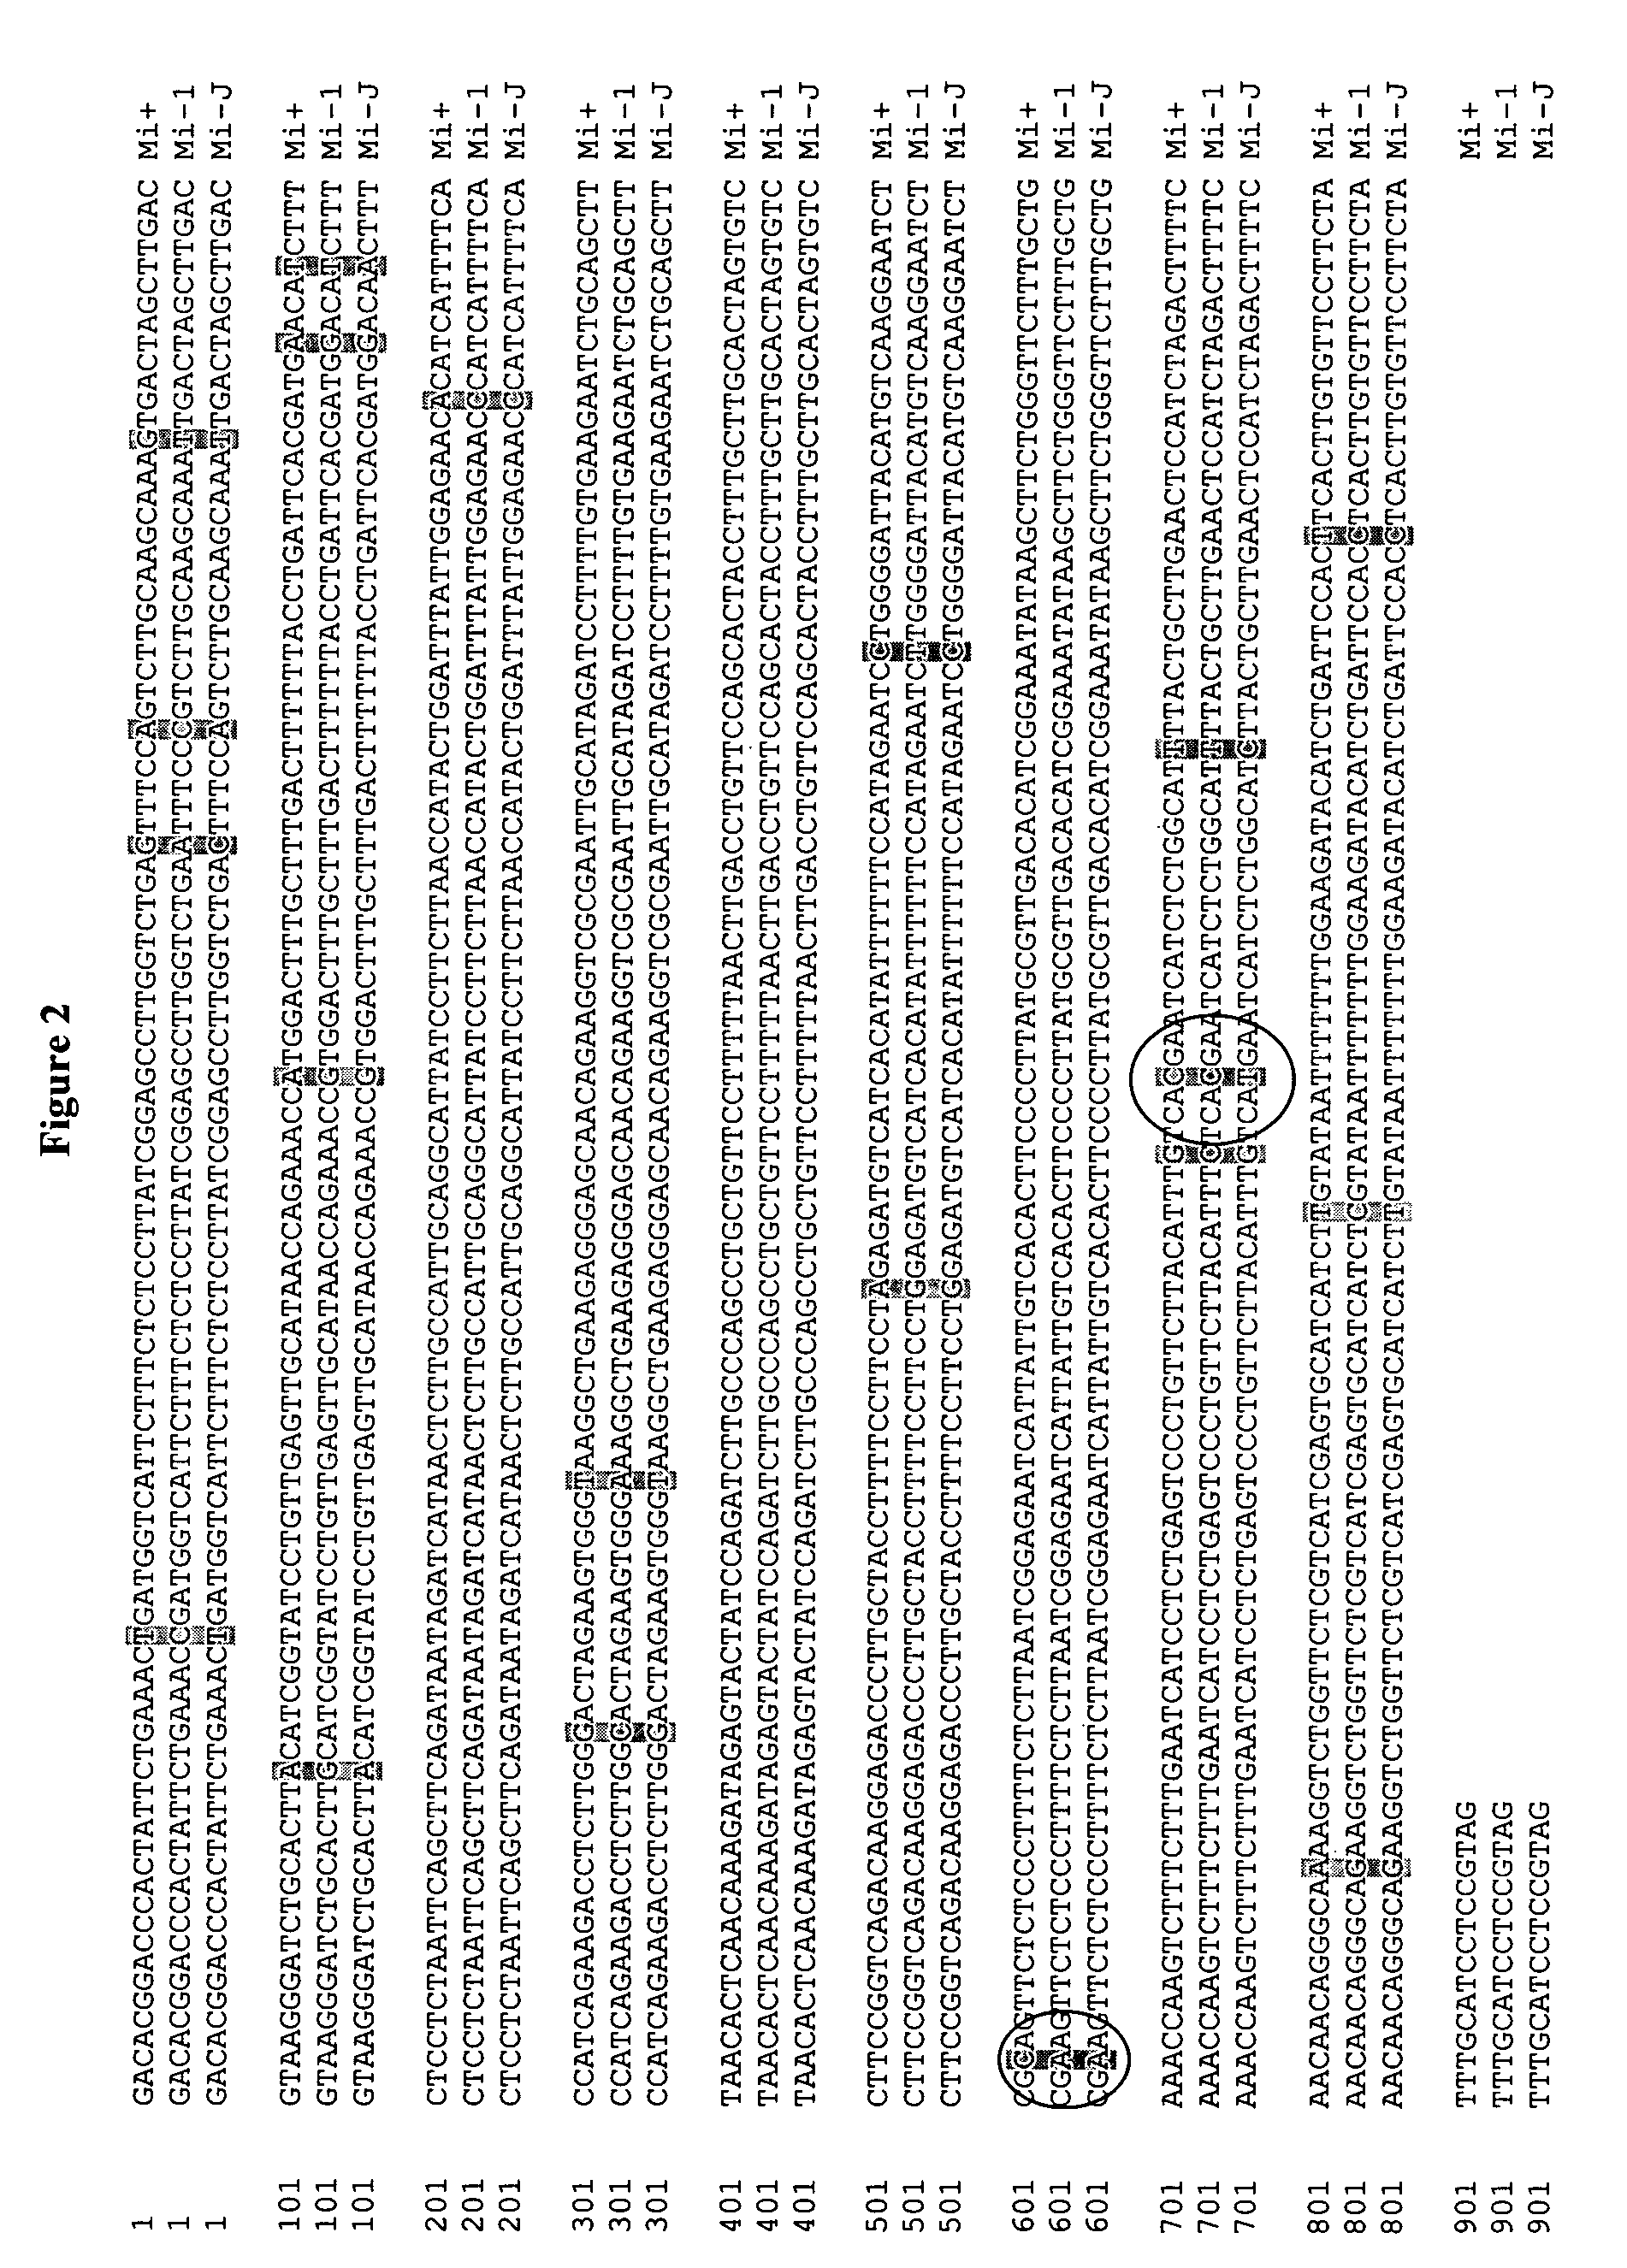 Methods for coupling resistance alleles in tomato